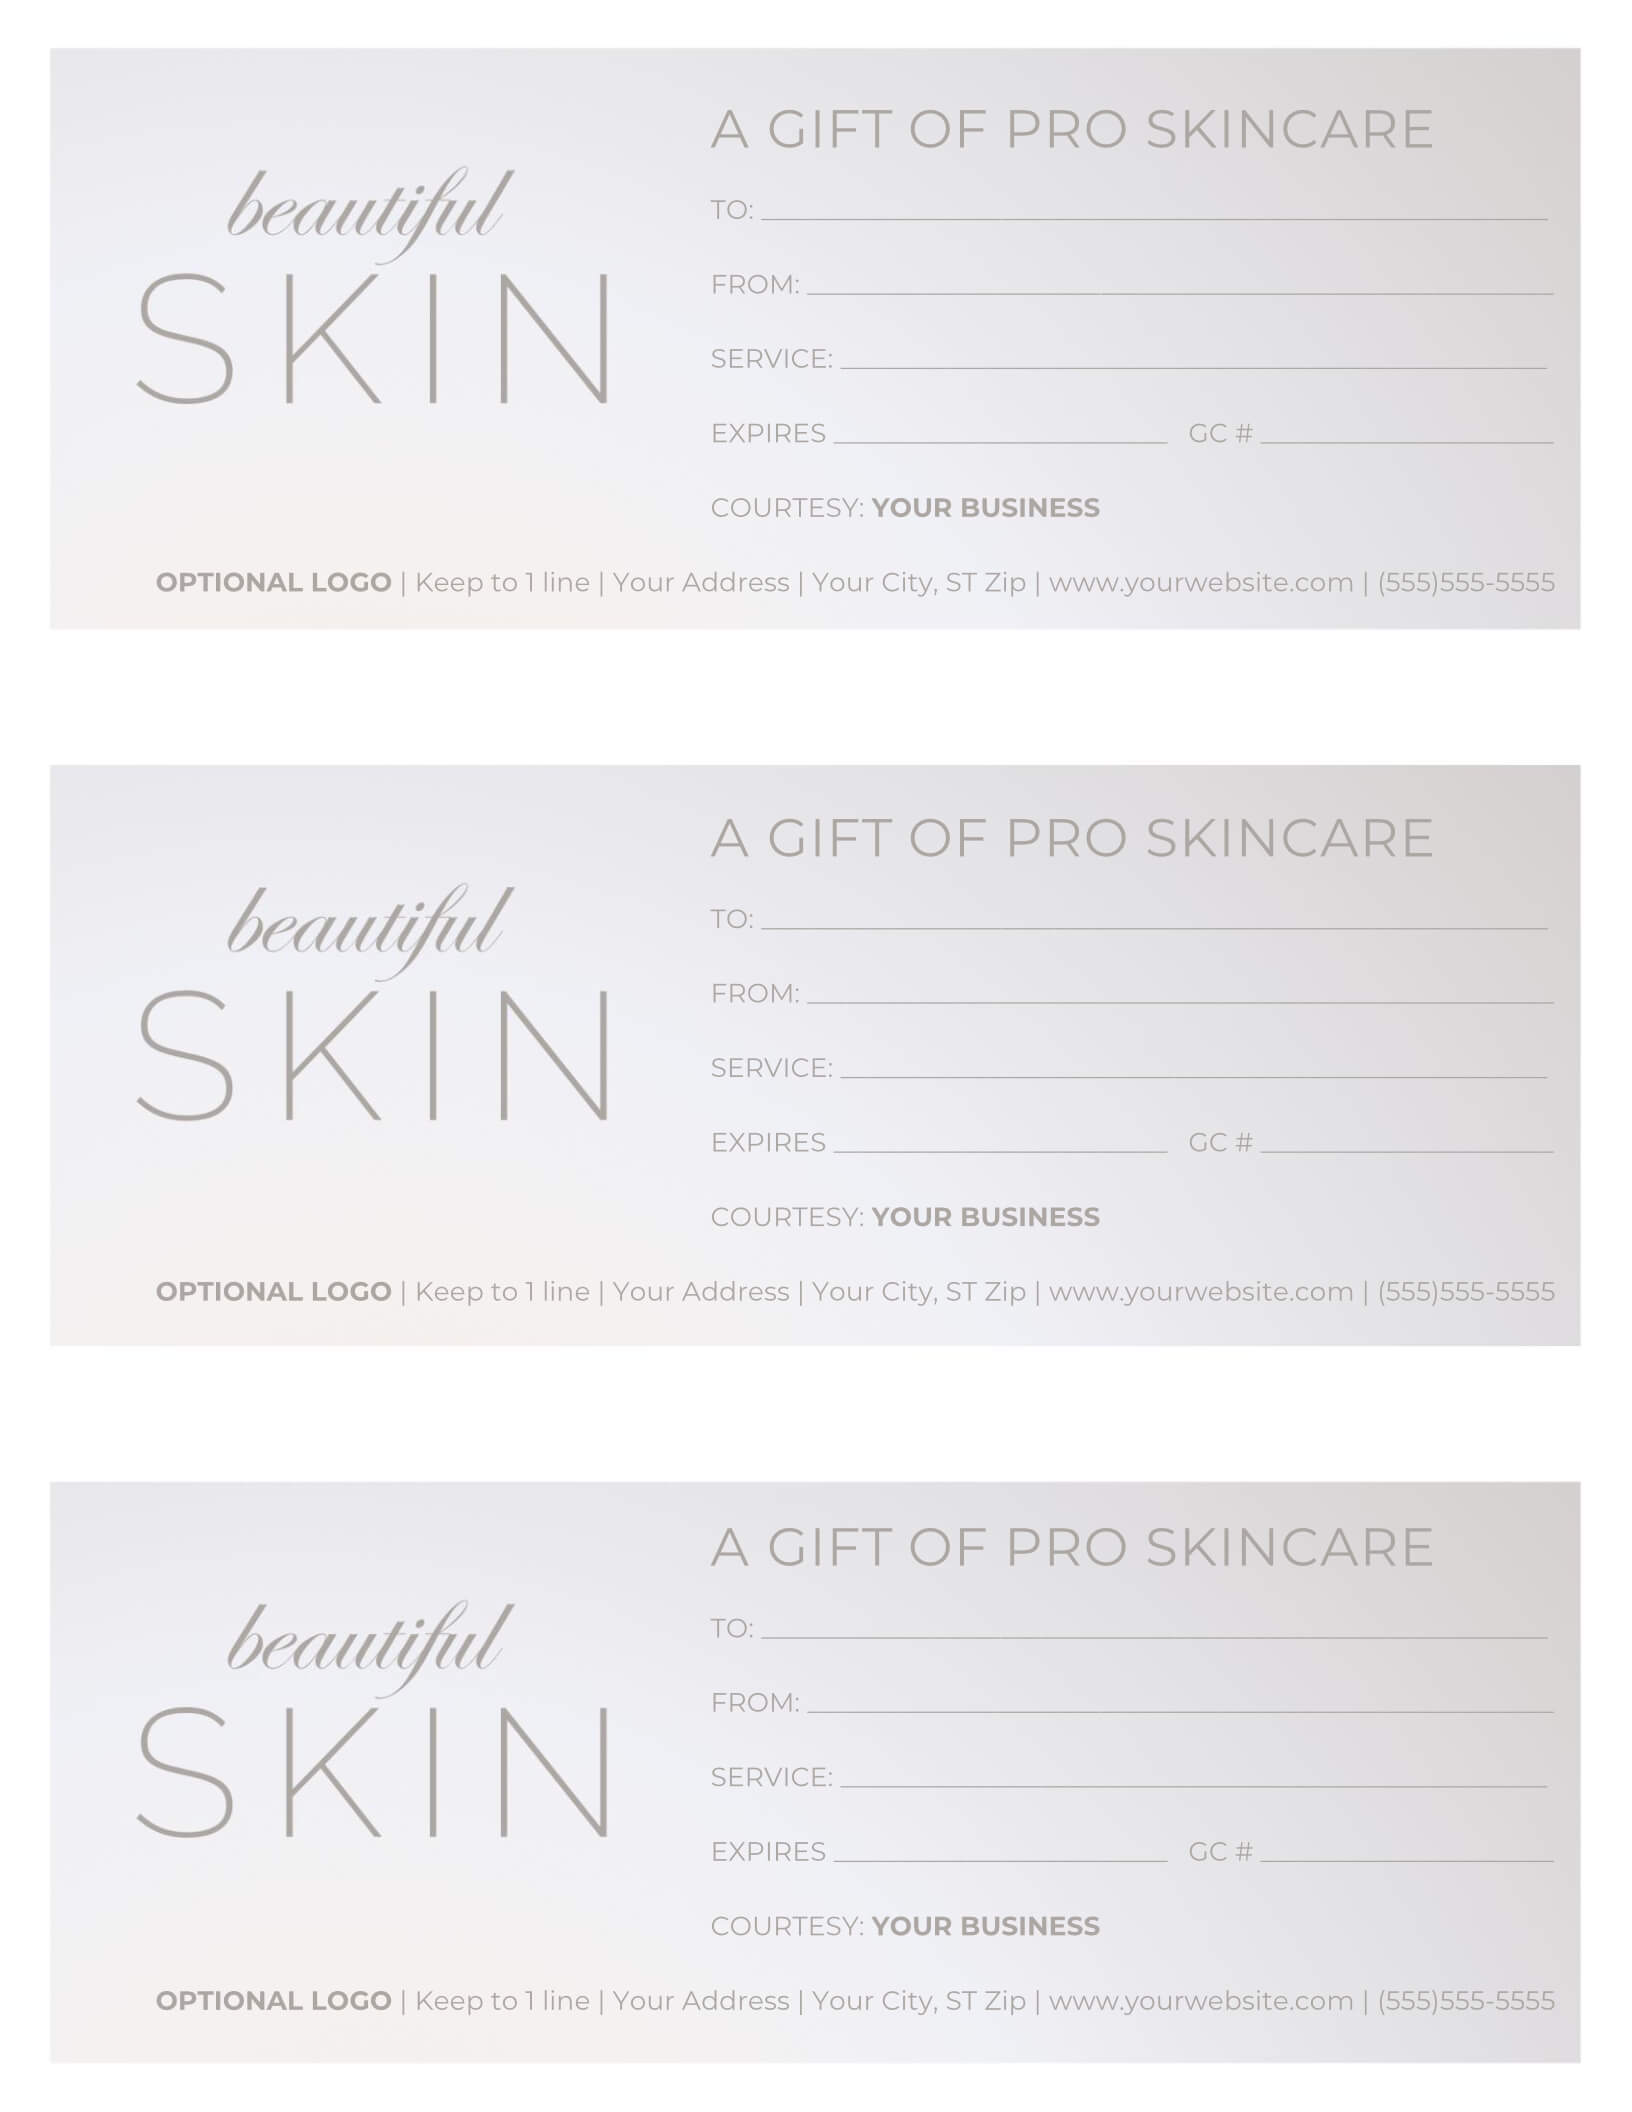 Free Gift Certificate Templates For Massage And Spa Inside Spa Day Gift Certificate Template